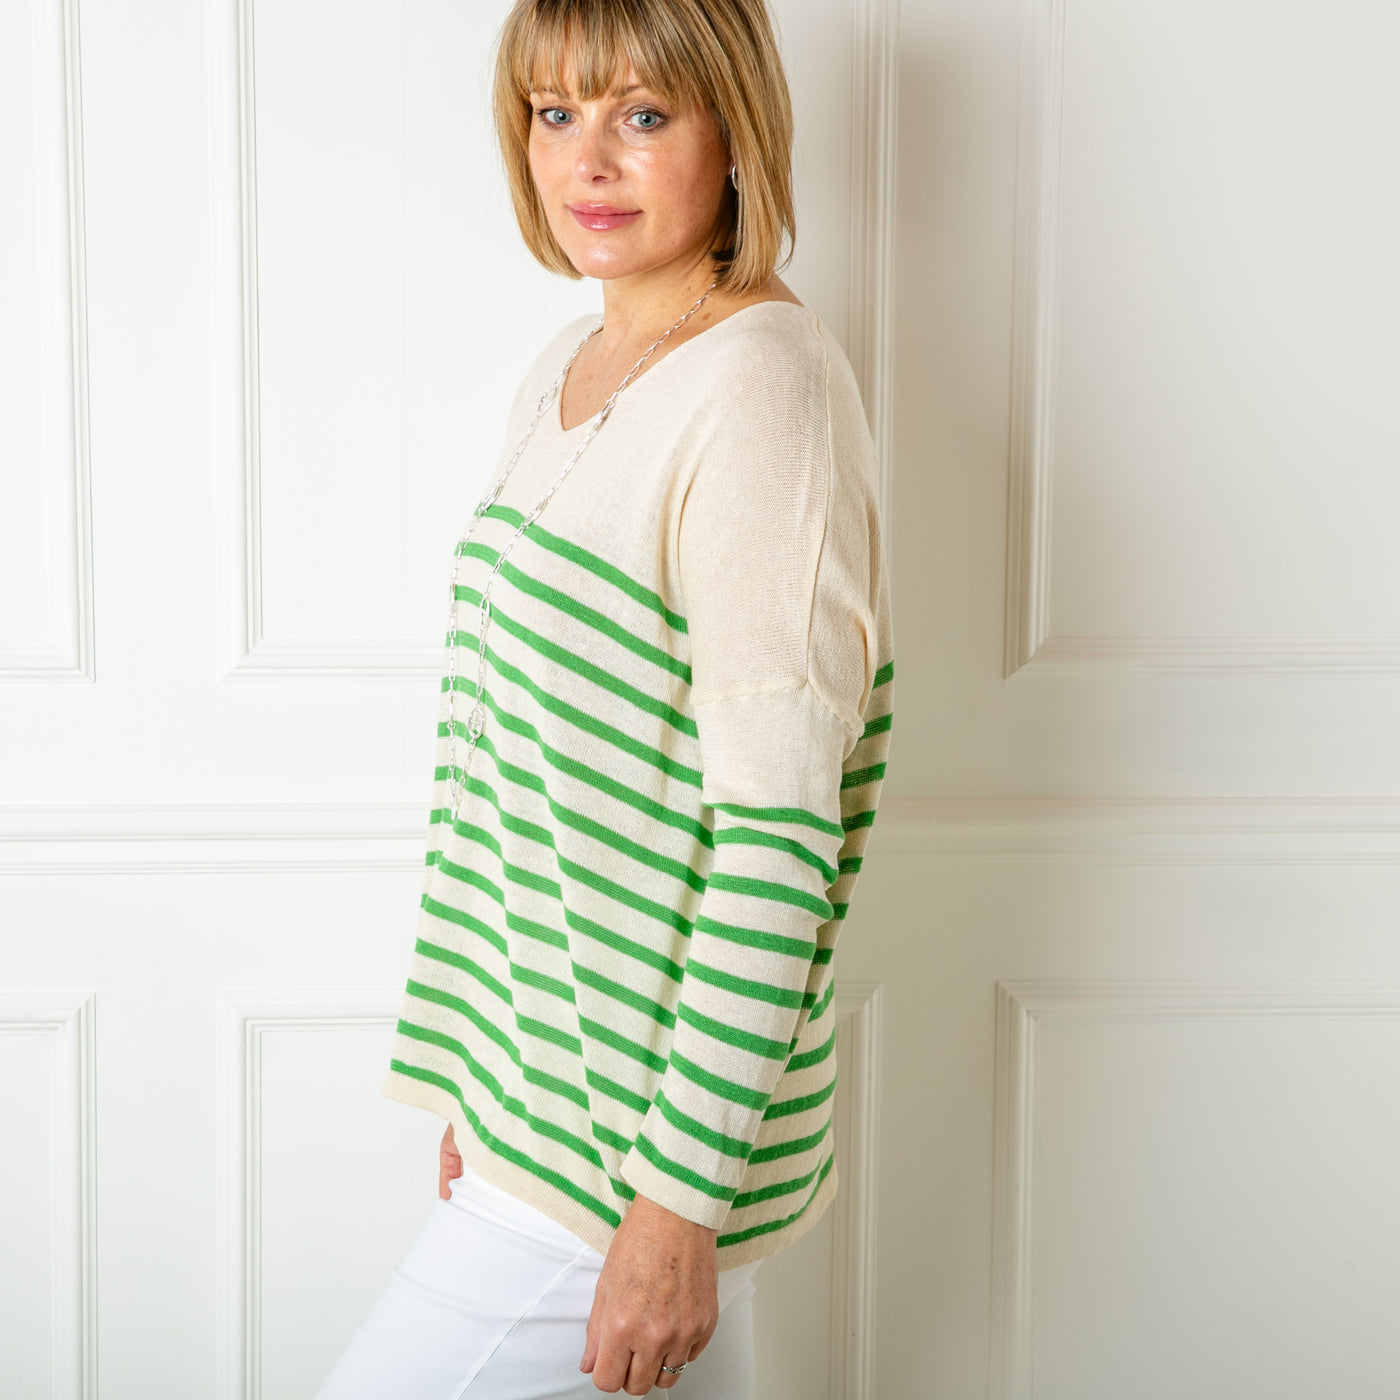 The Fine Knit Stripe Jumper in cream with emerald green stripes across the sleeves and body